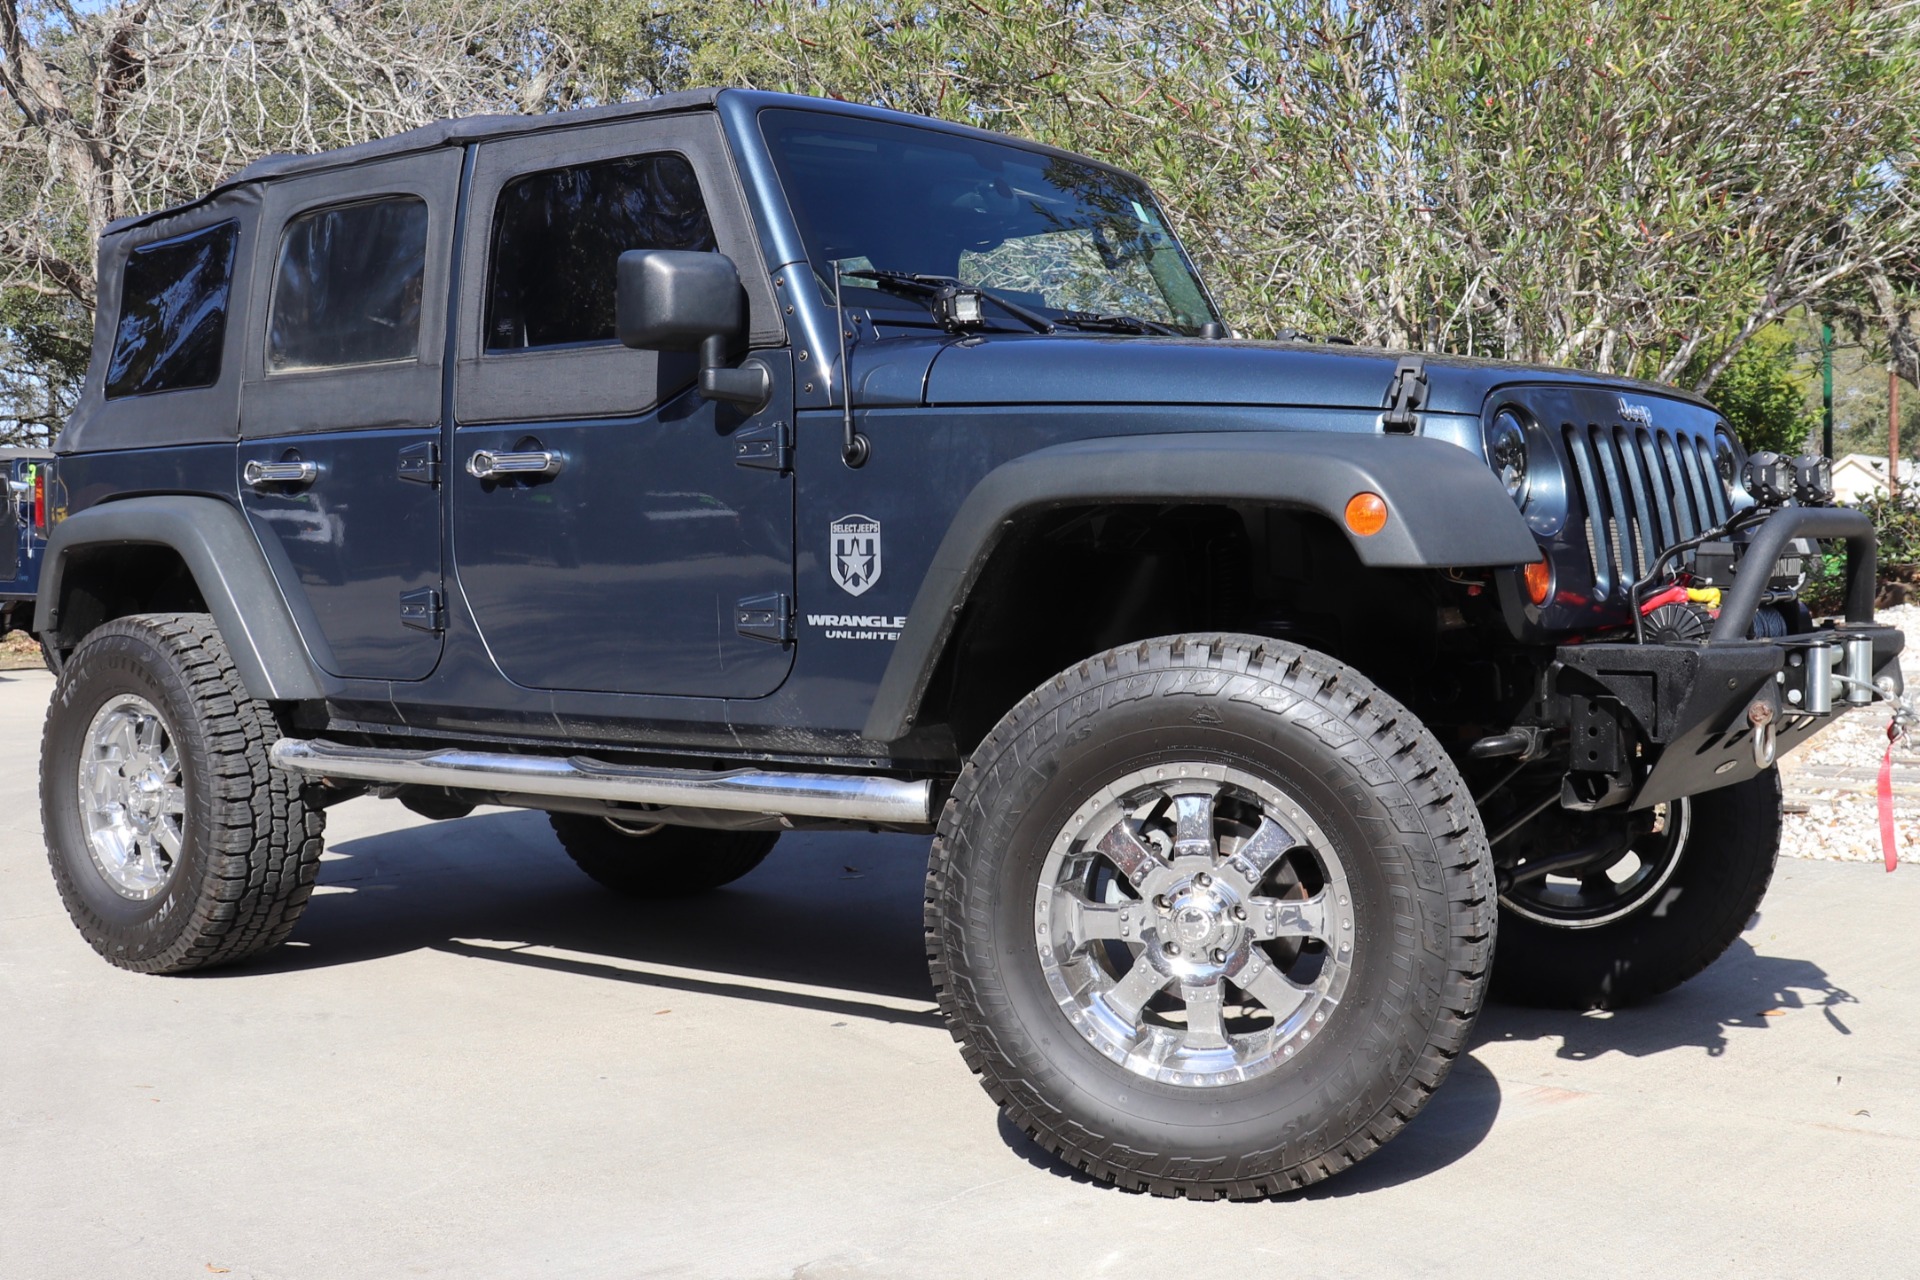 Used 2008 Jeep Wrangler Unlimited X For Sale ($21,995) | Select Jeeps Inc.  Stock #558339